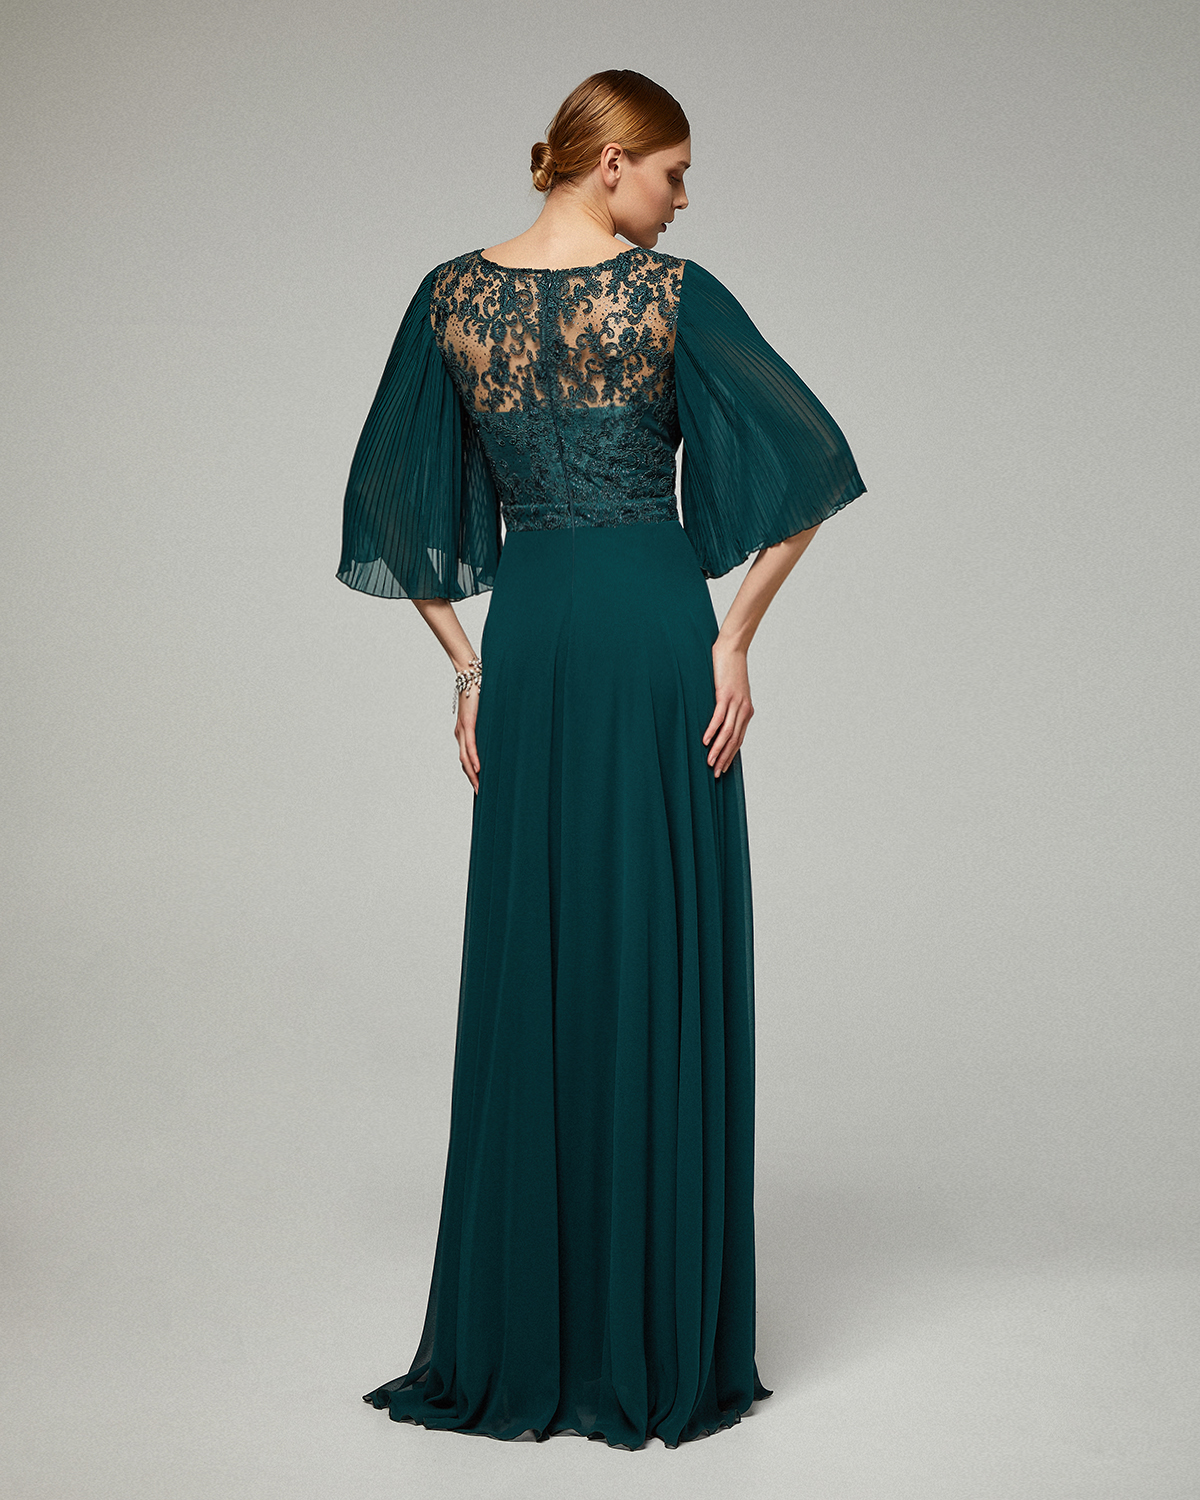 Classic Dresses / Long evening chiffon dress with lace top and pleated sleeves